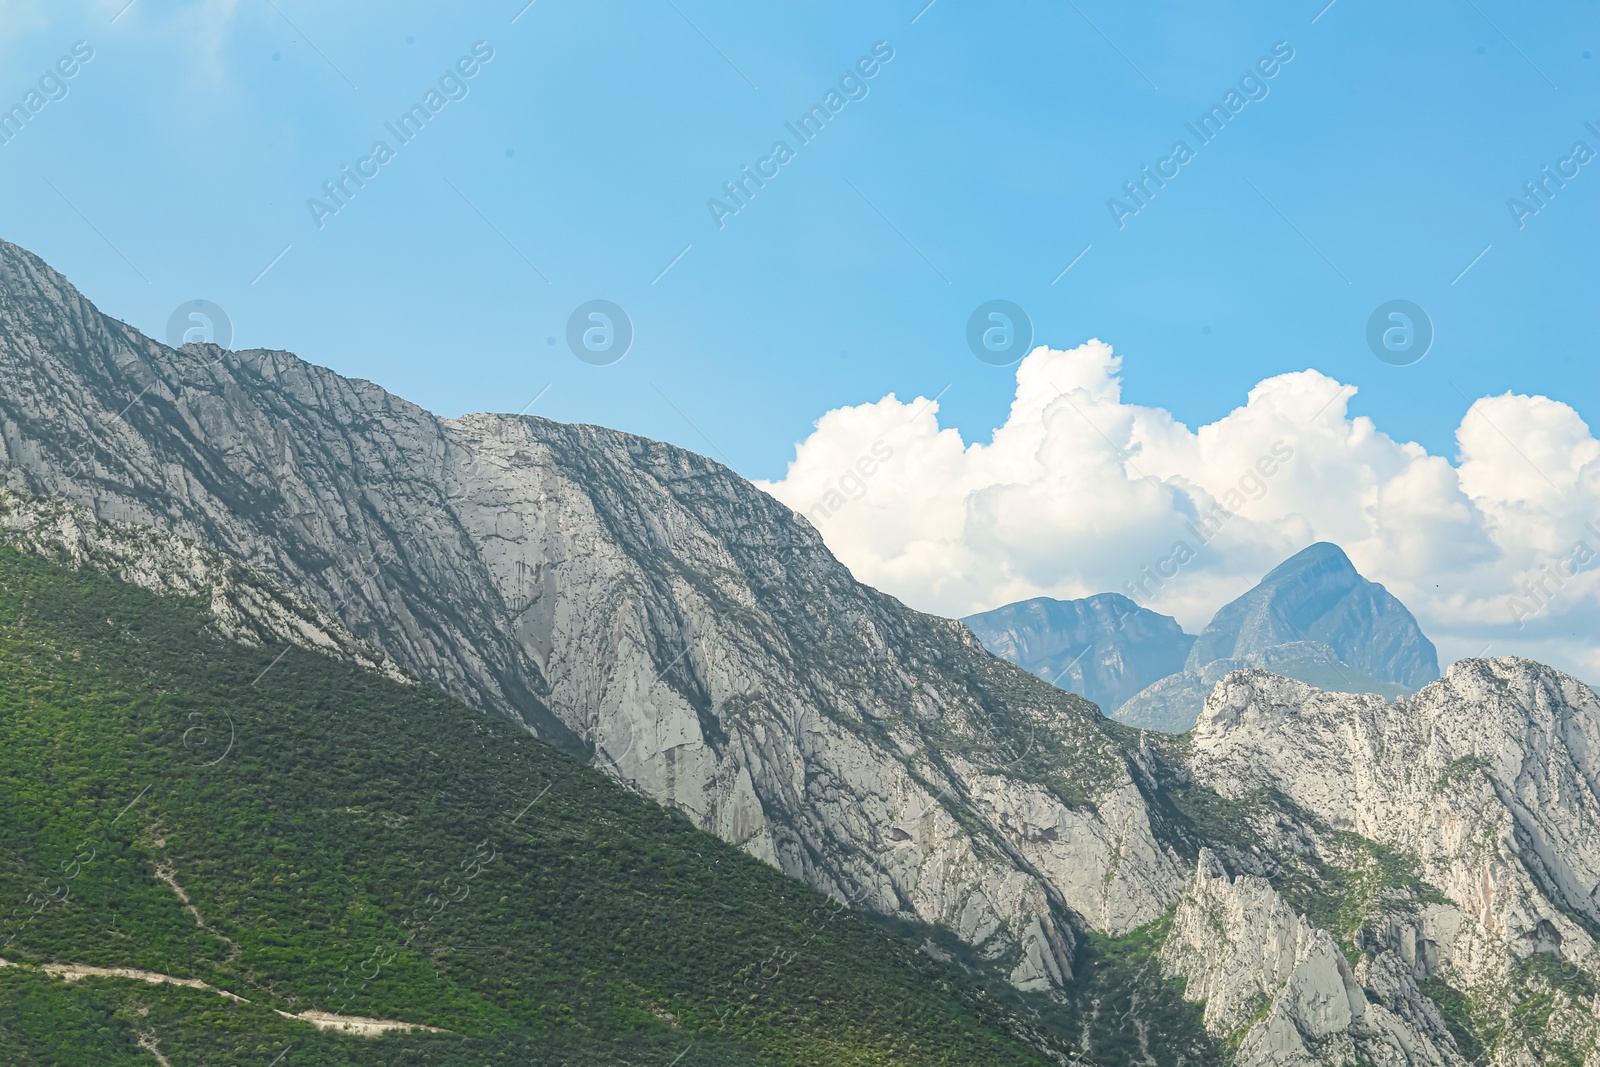 Photo of Majestic mountain landscape under blue sky with clouds